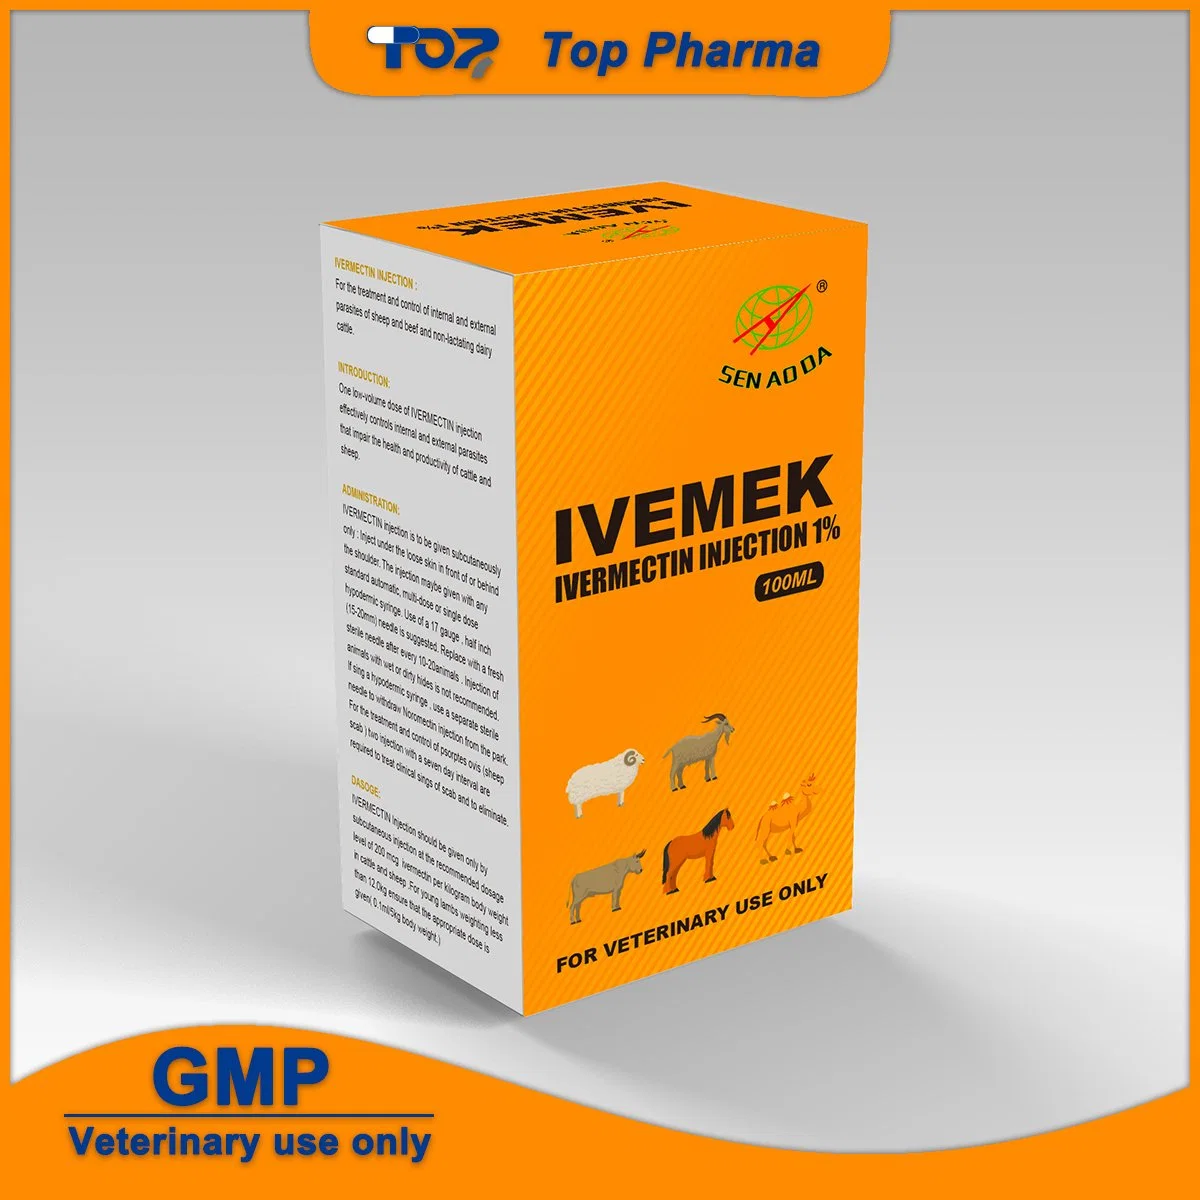 GMP Certification Veterinary Ivermectin 1% Injection 100ml